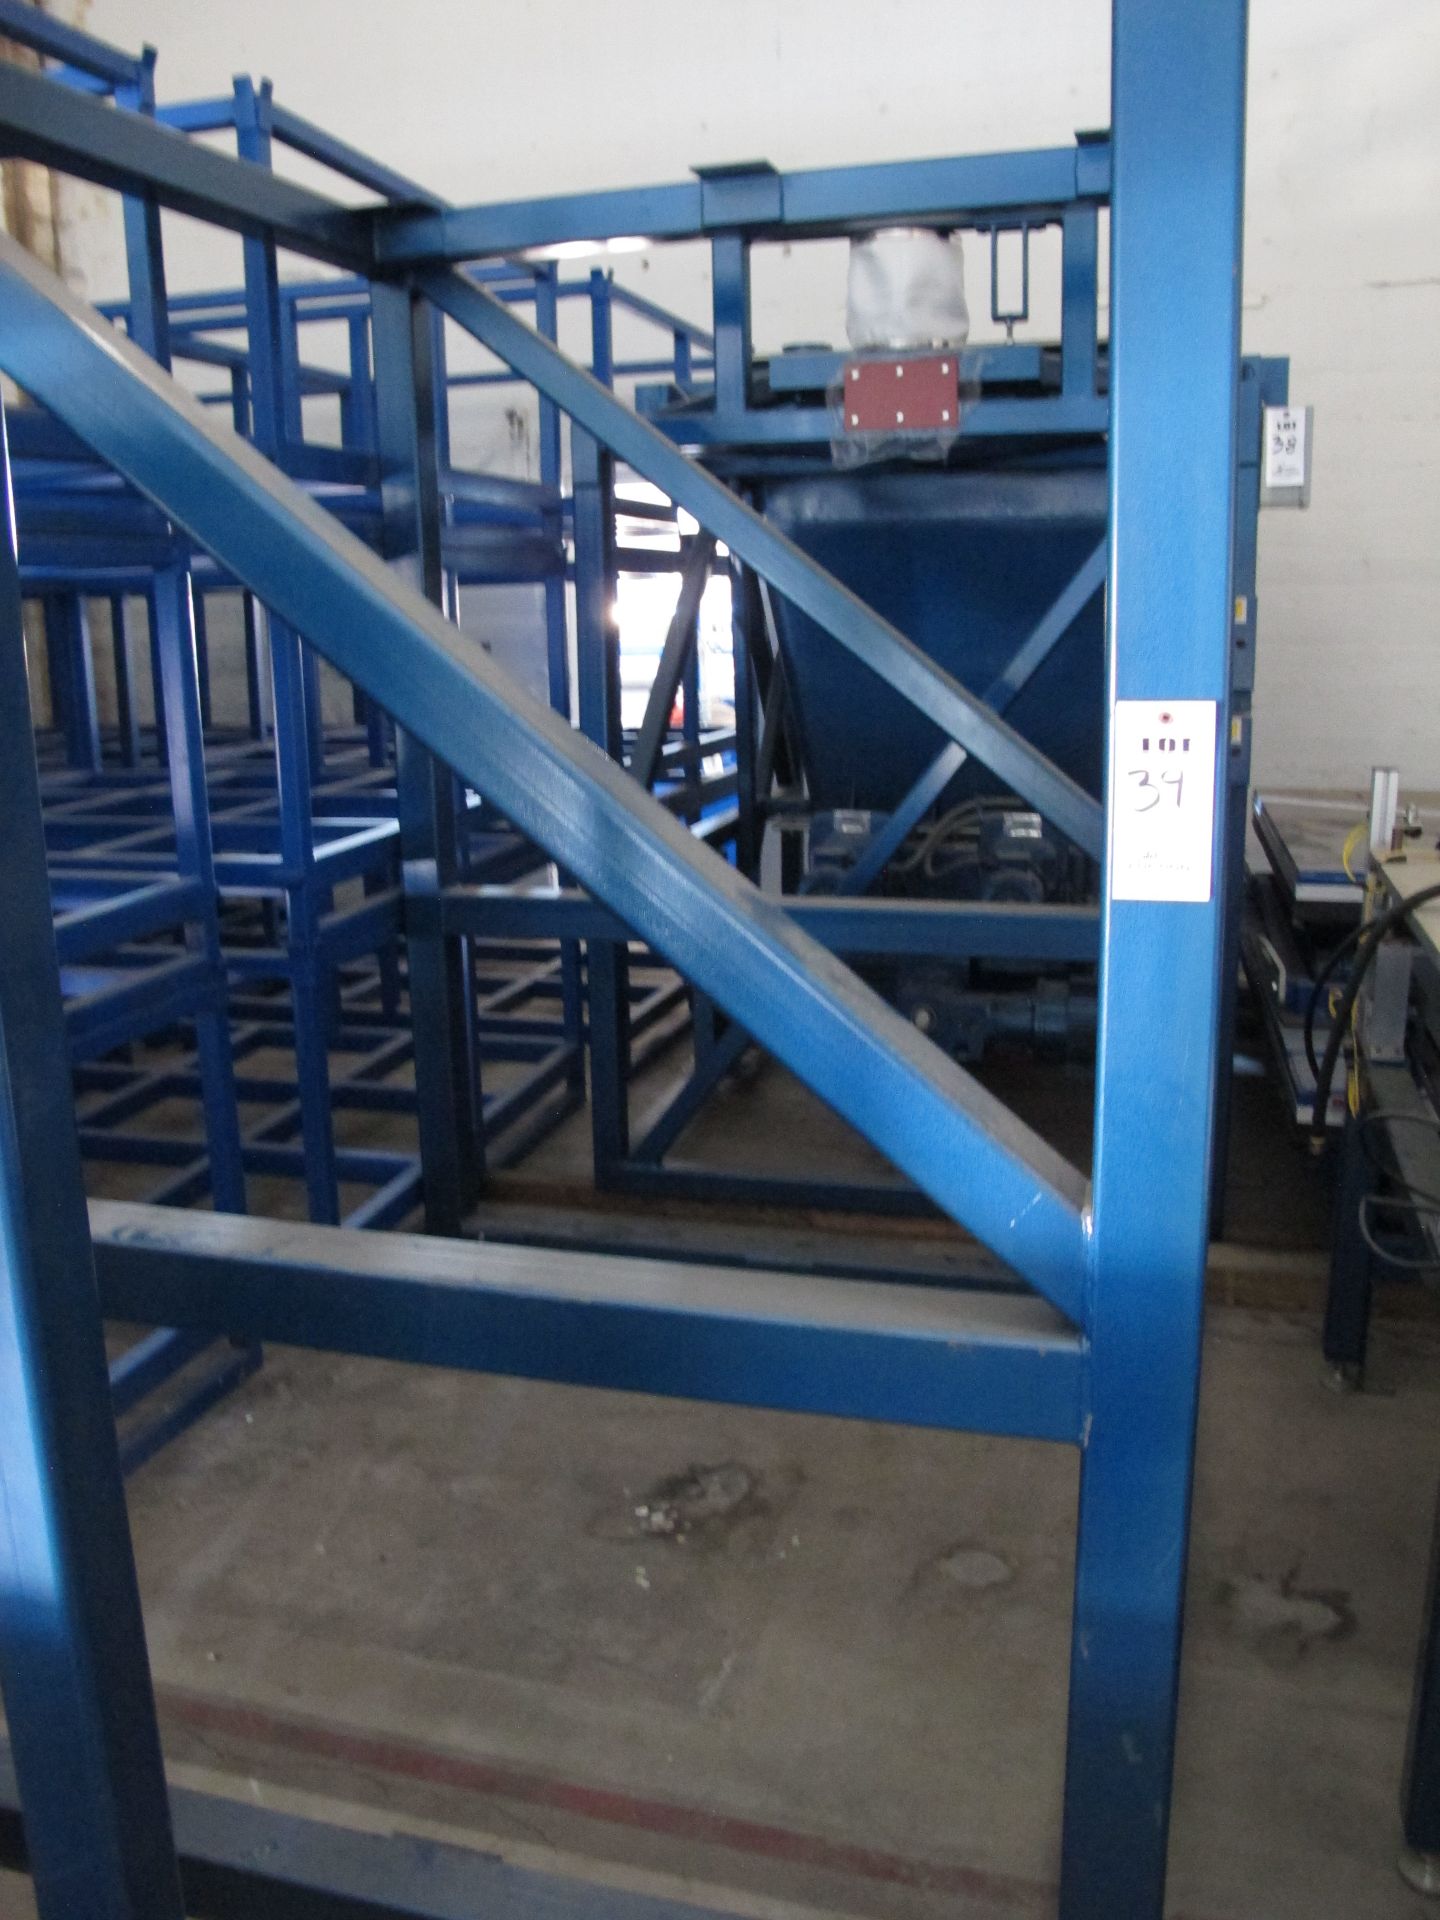 (19 PIECES) BLUE PAINTED STEEL SUPPORTS FOR MIXER SYSTEM, LOADING & HANDLING FEE: $800 - Image 2 of 2